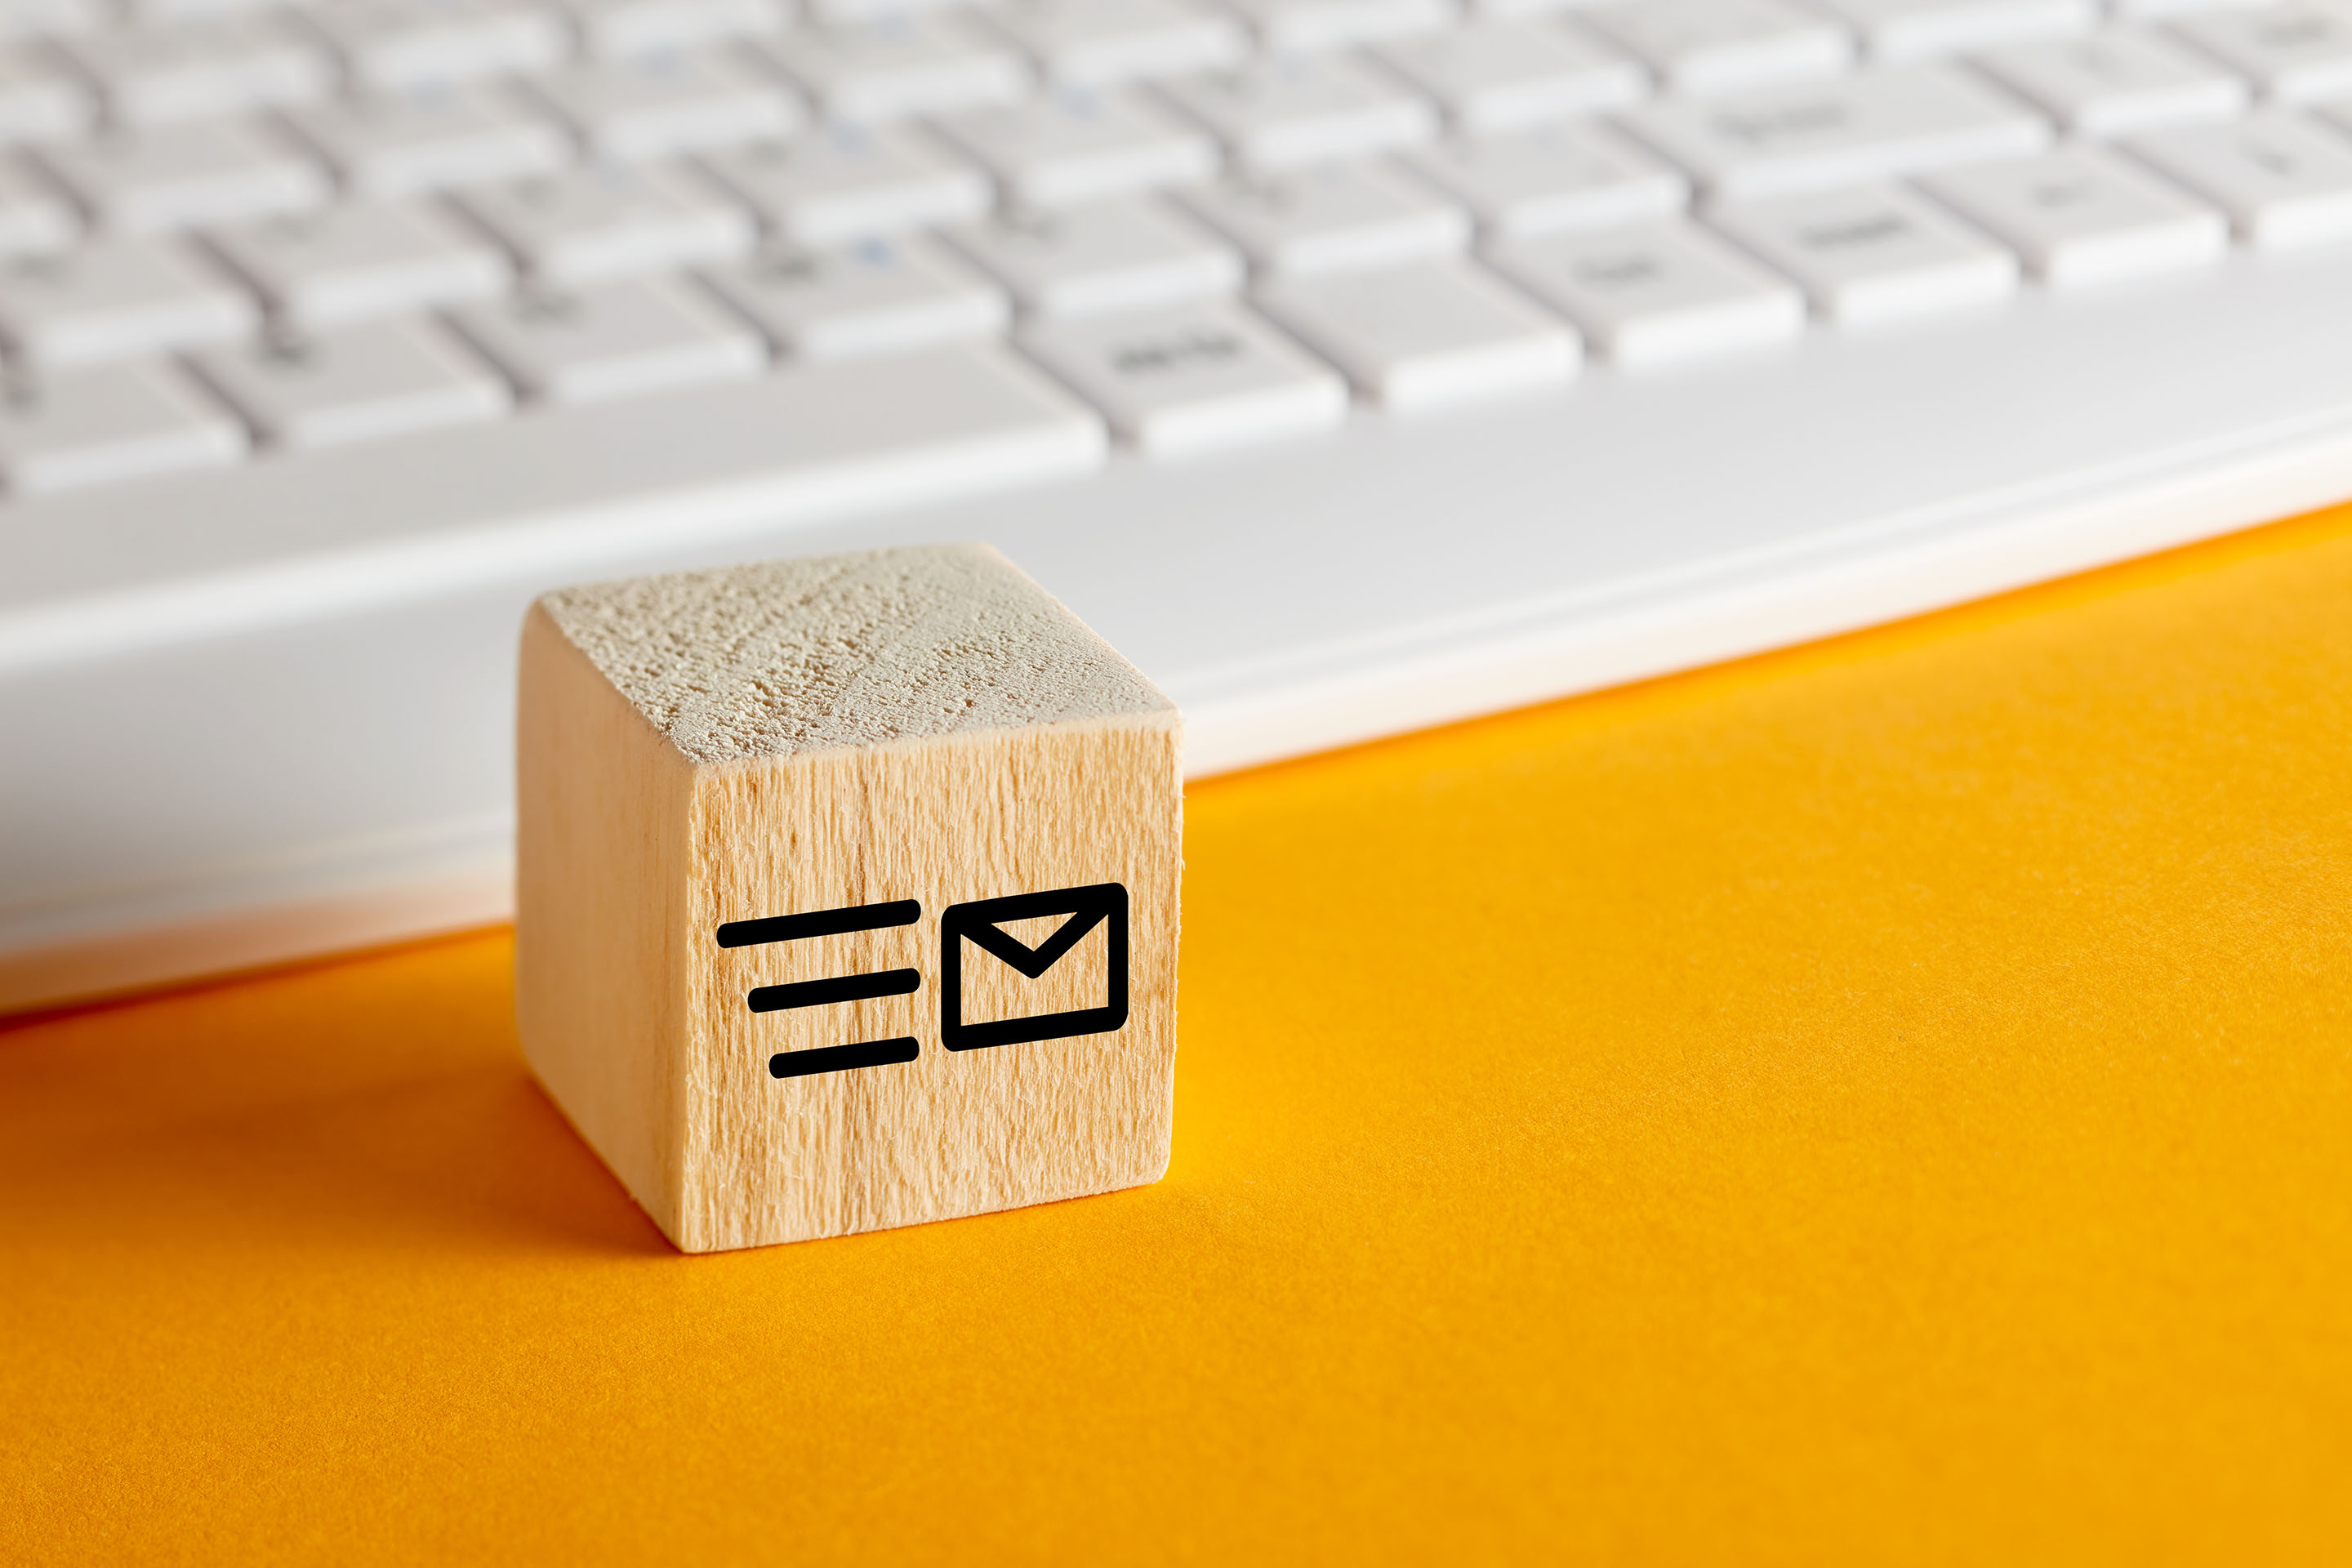 Wooden block with an email icon